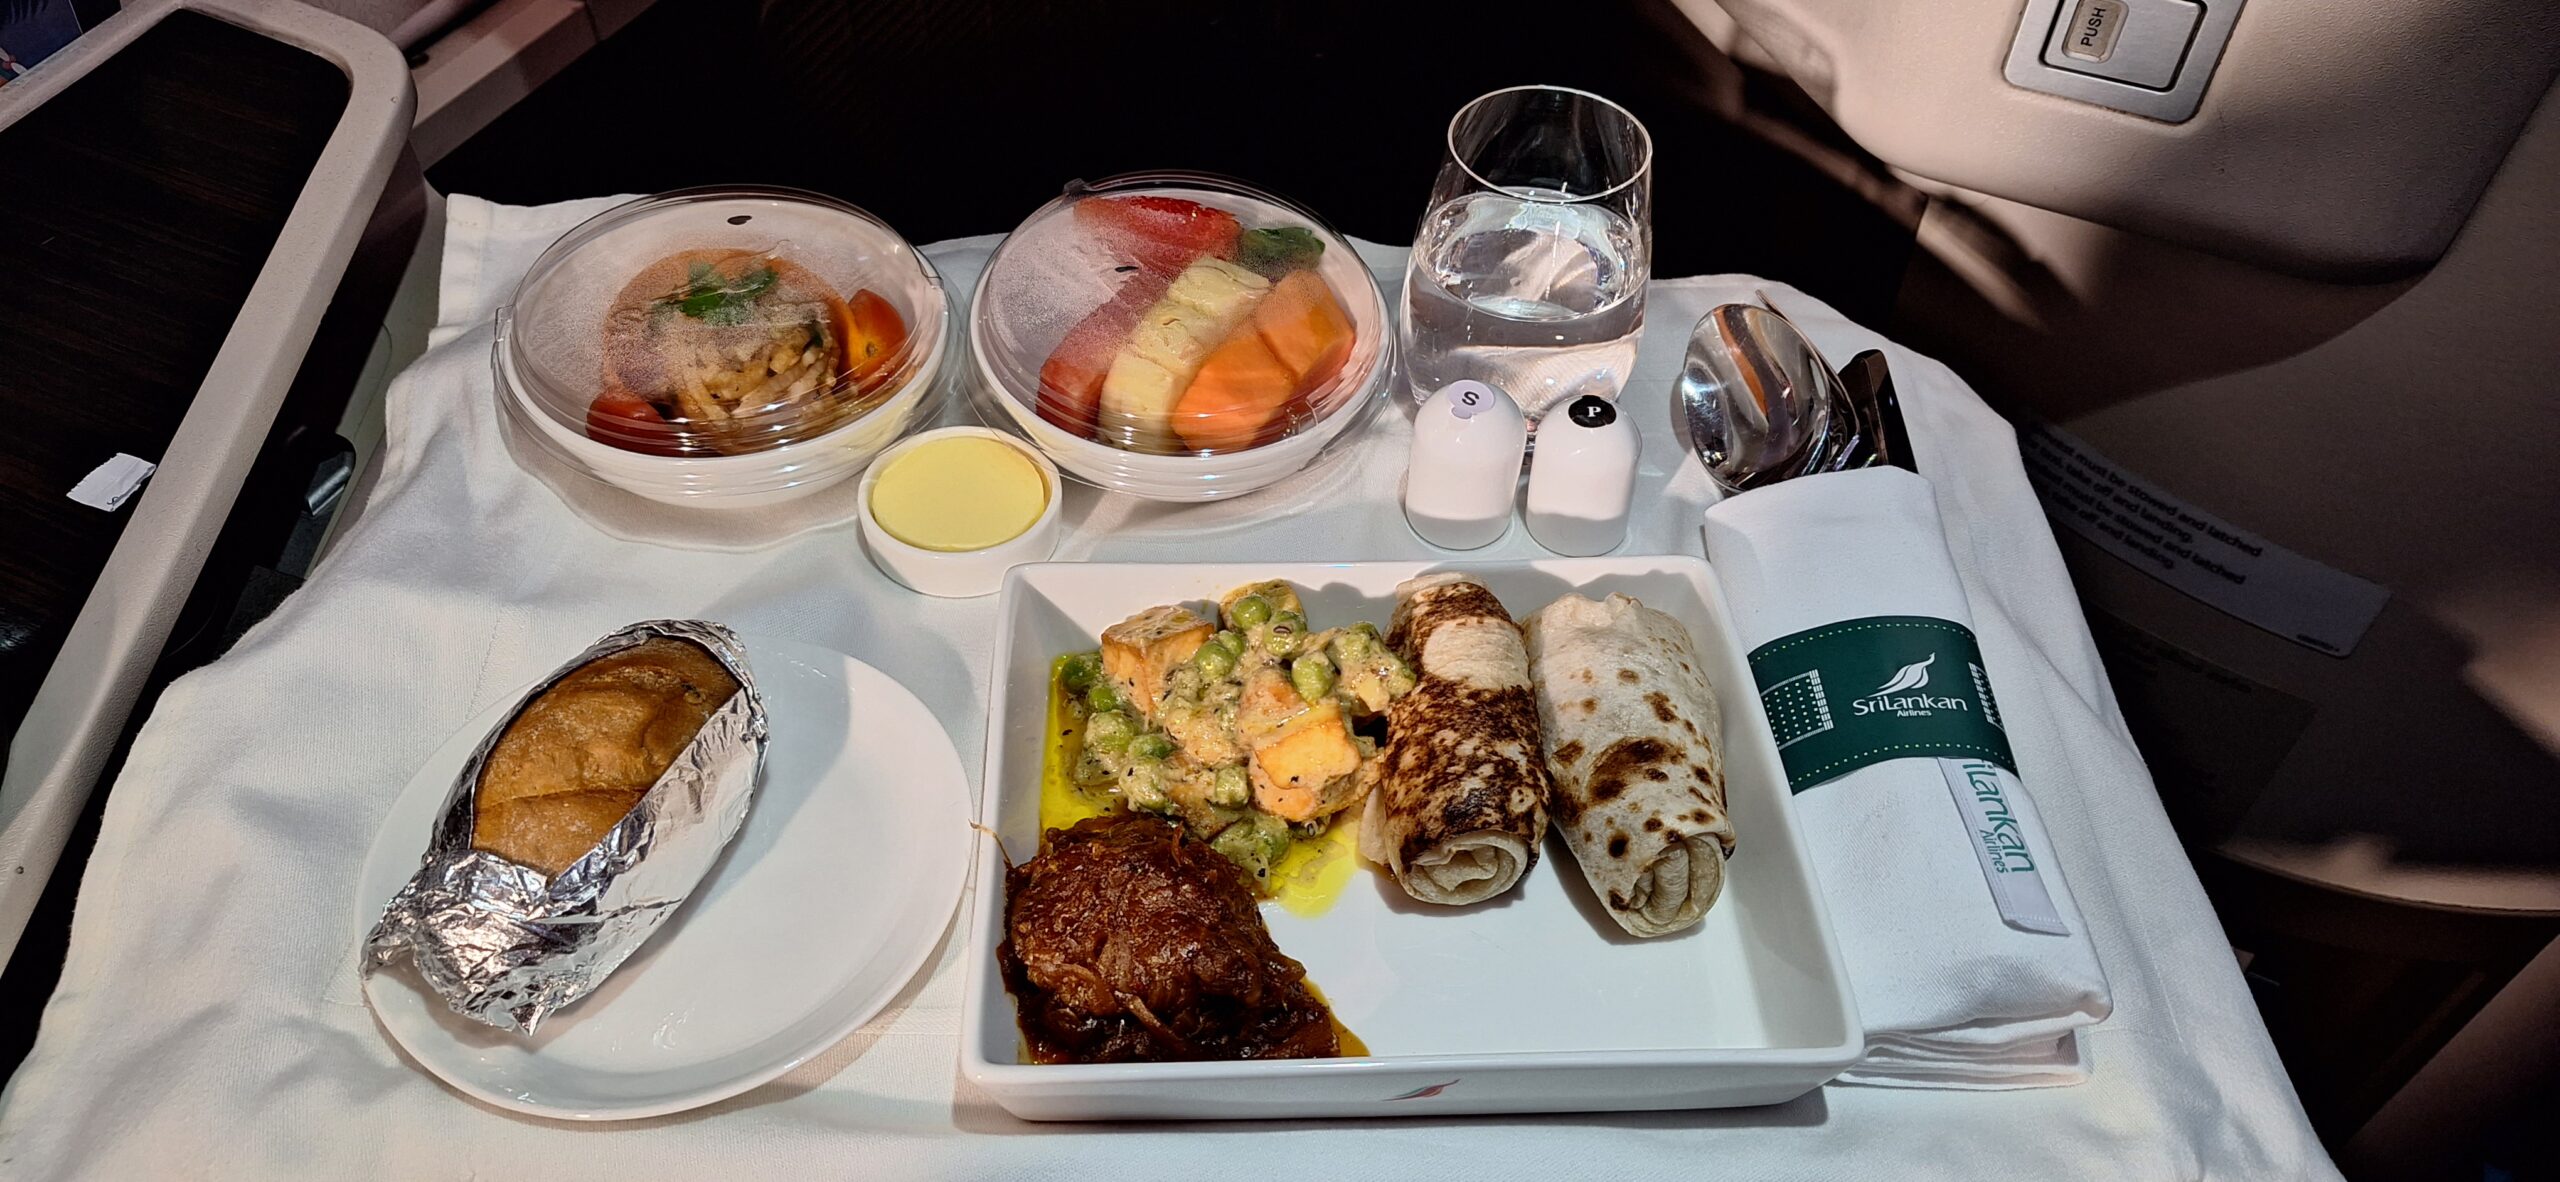 SriLankan Airlines Business Class Lunch